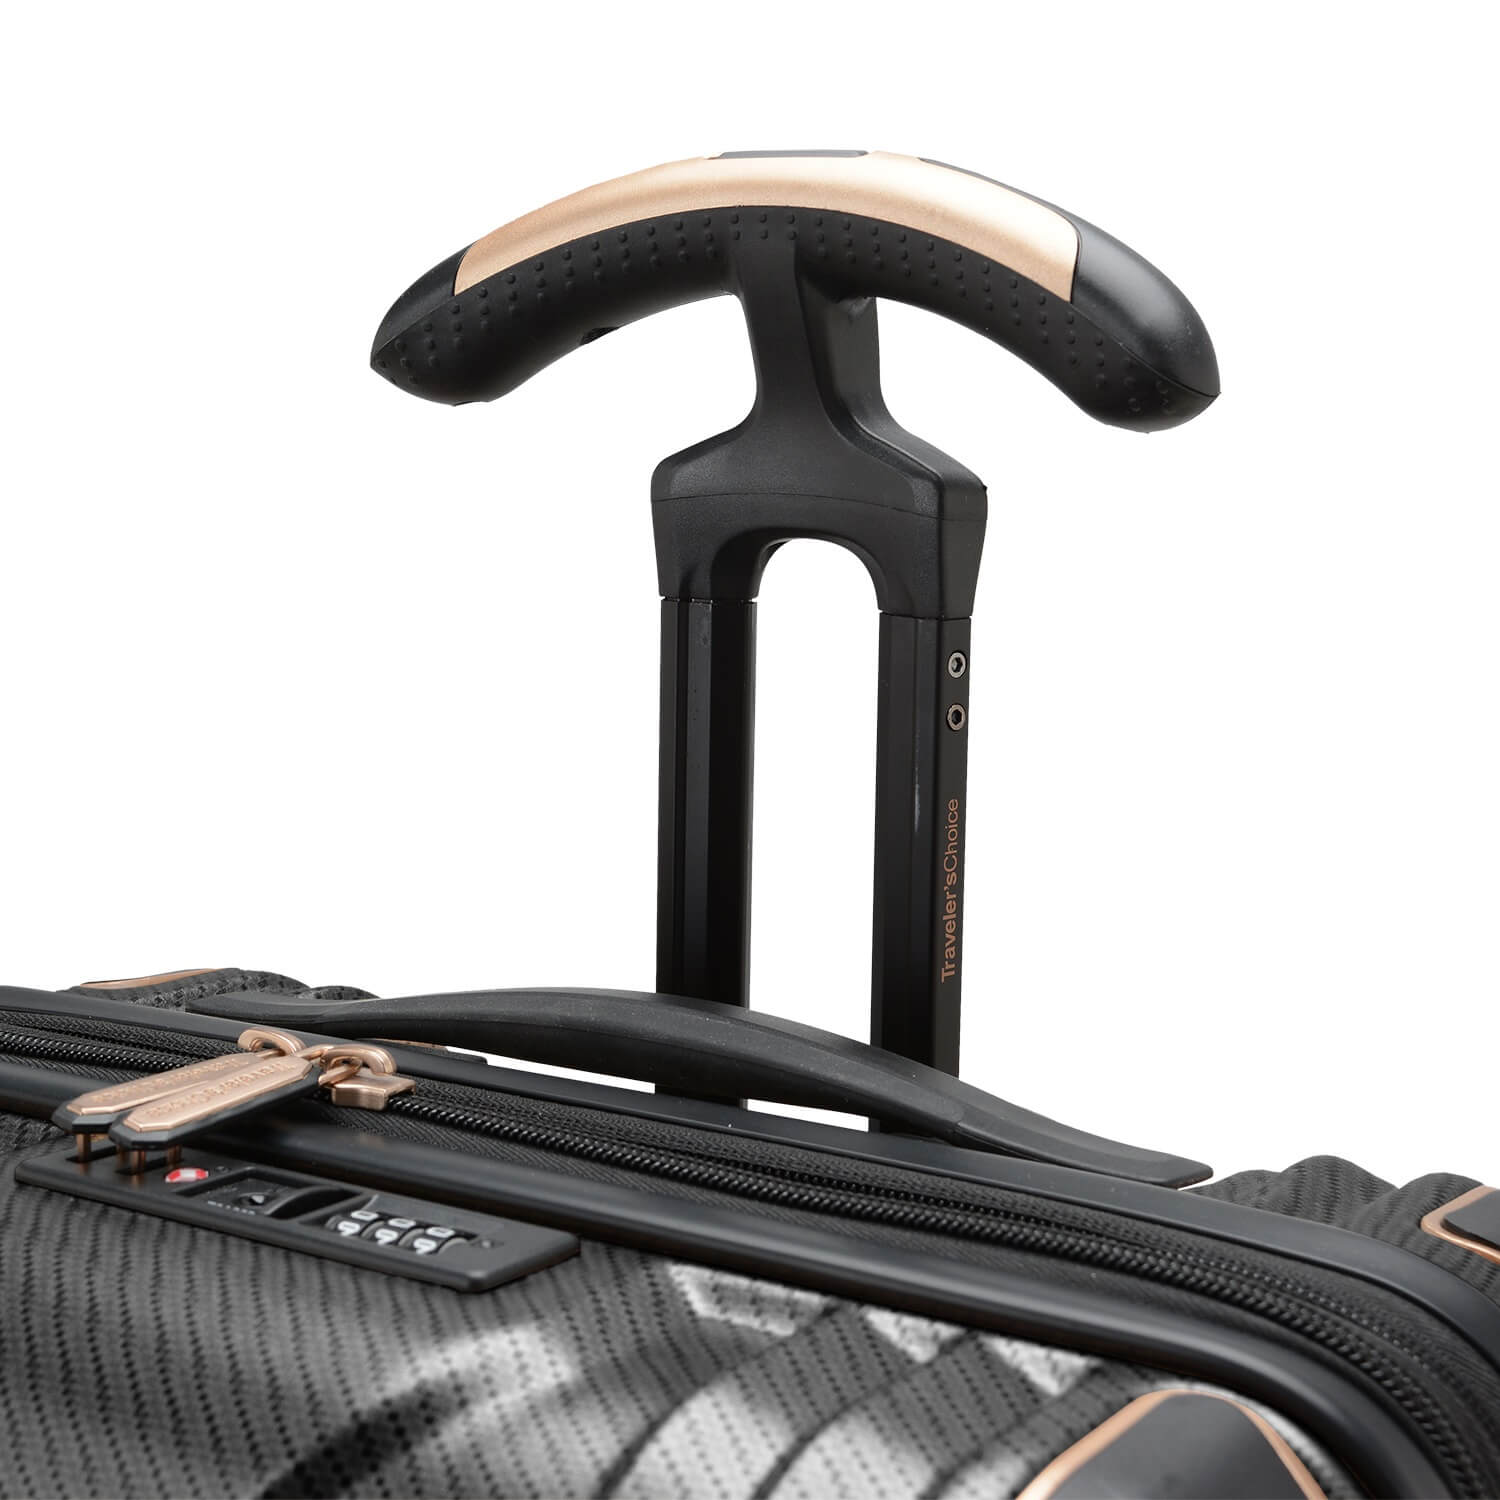 An image of a black luggage with a gold handle.